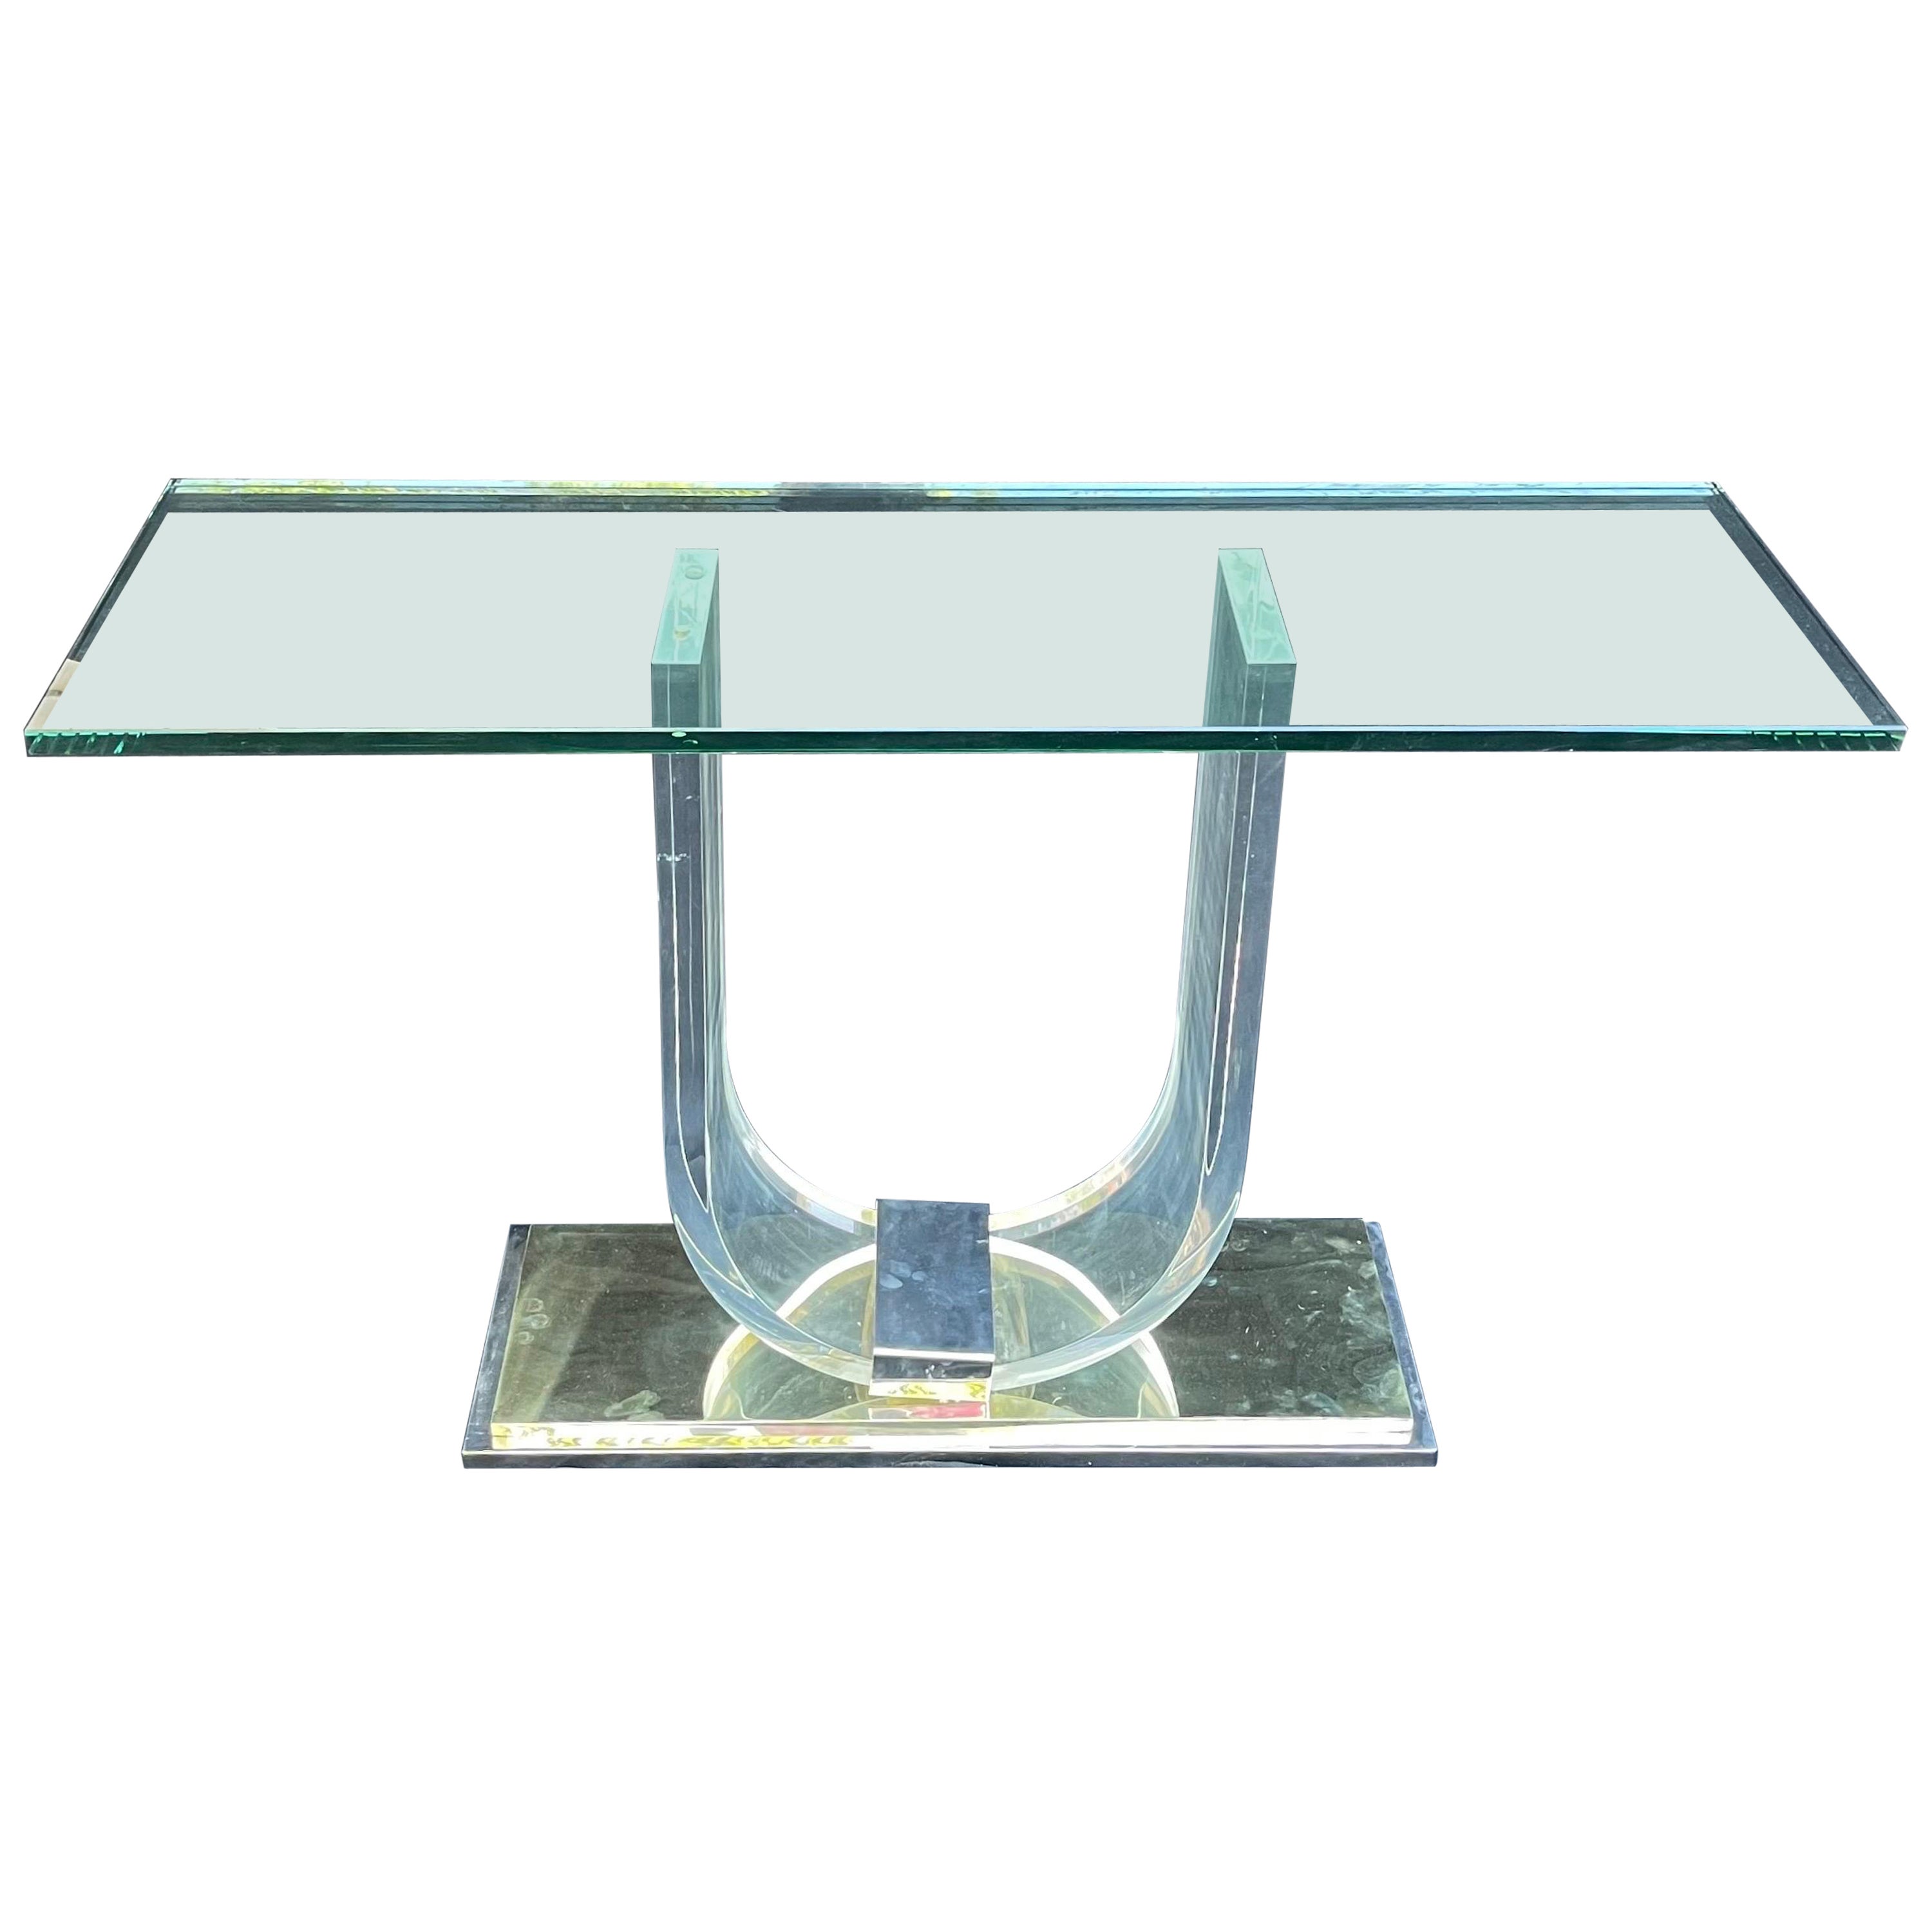 Wonderful Mid-Century Modern Art Deco Lucite Chrome Brass Console Serving Table For Sale